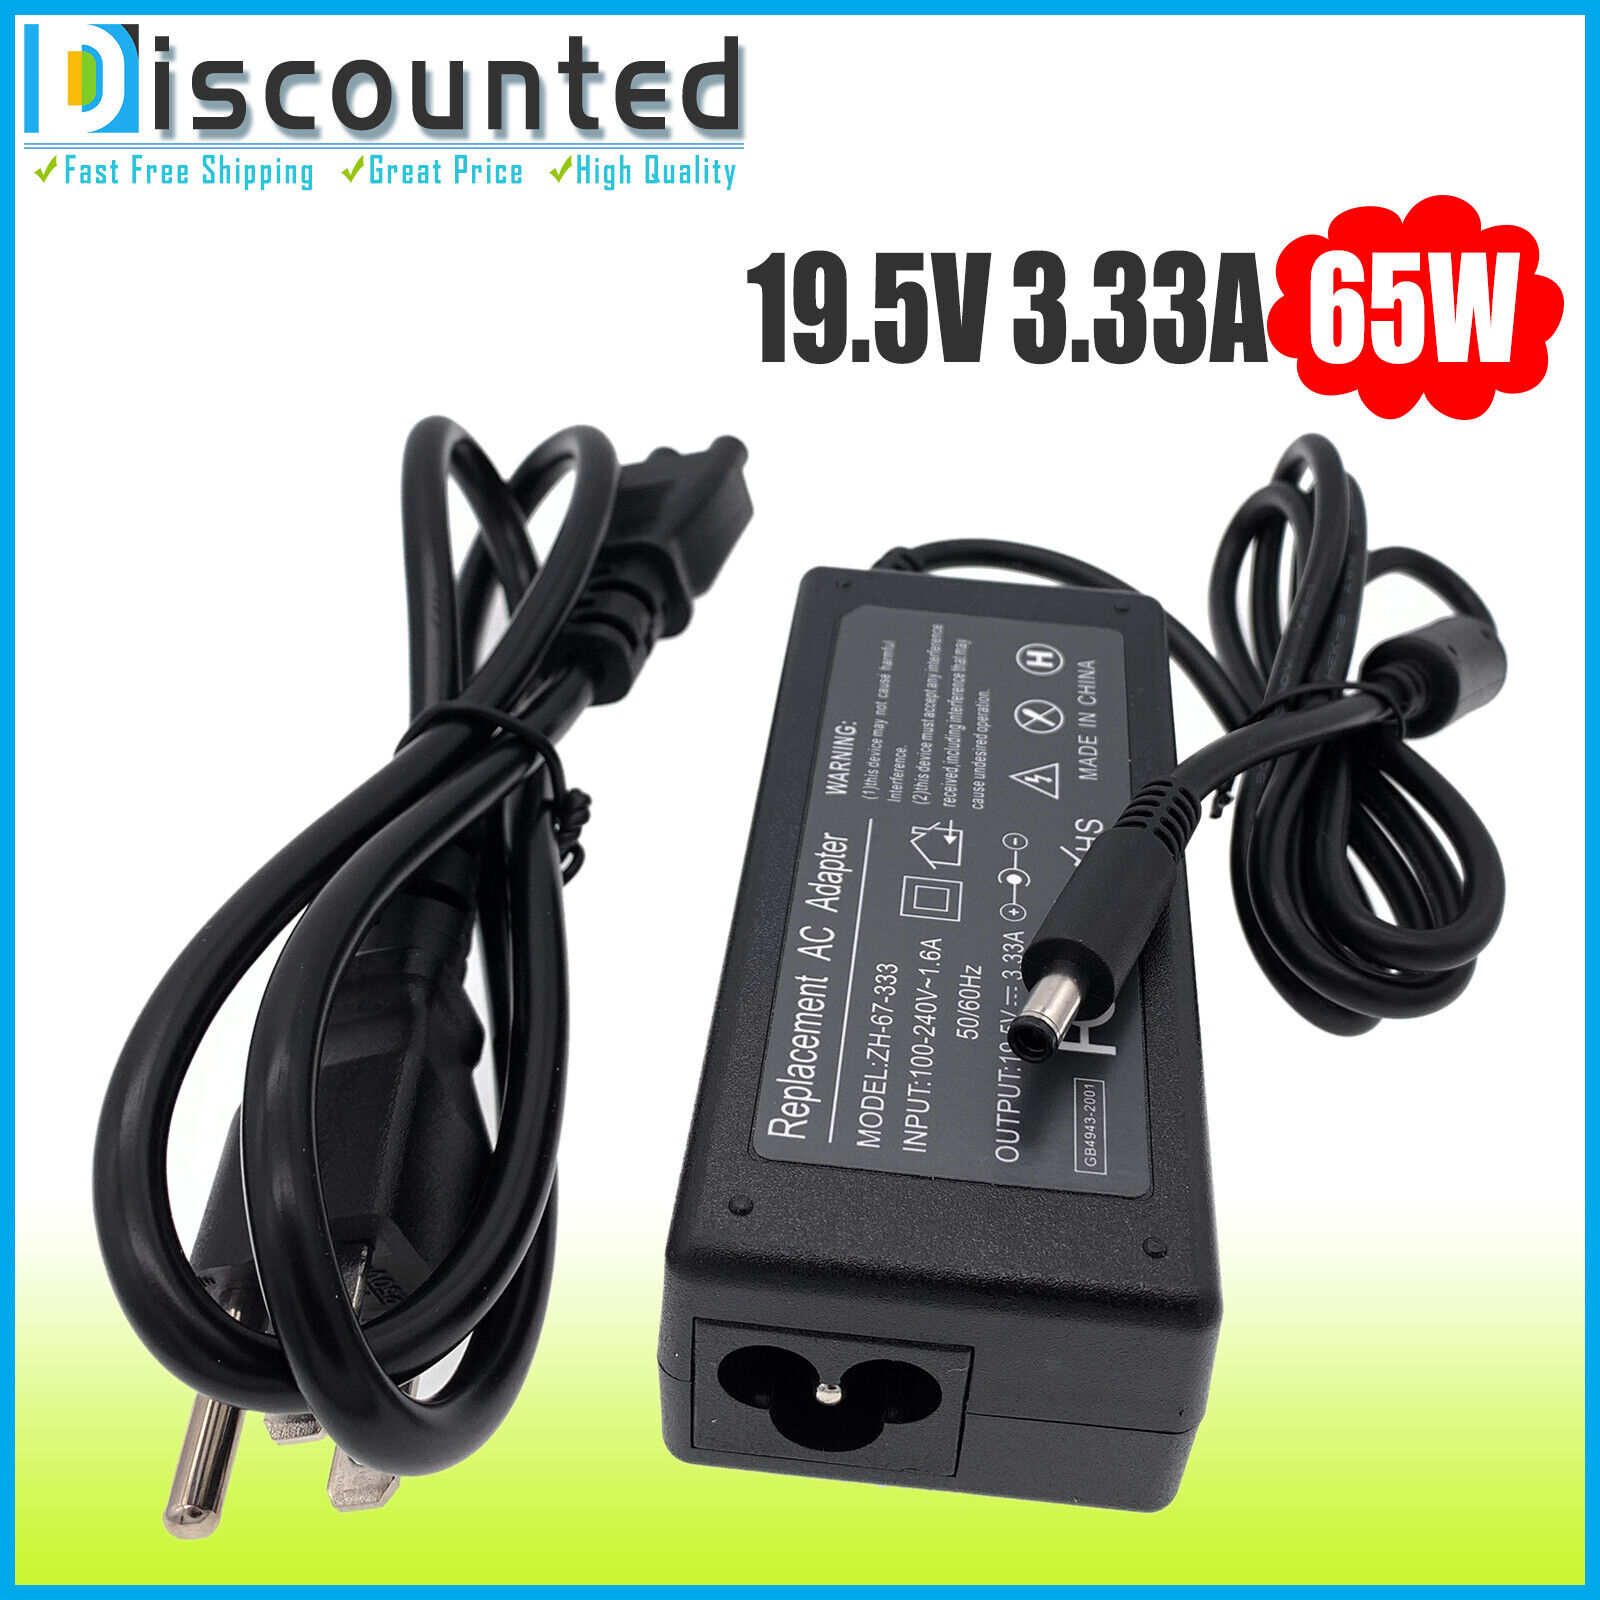 AC Adapter For HP 15t-dw100 15t-dw200 15t-dw300 Laptop Charger Power Supply Cord